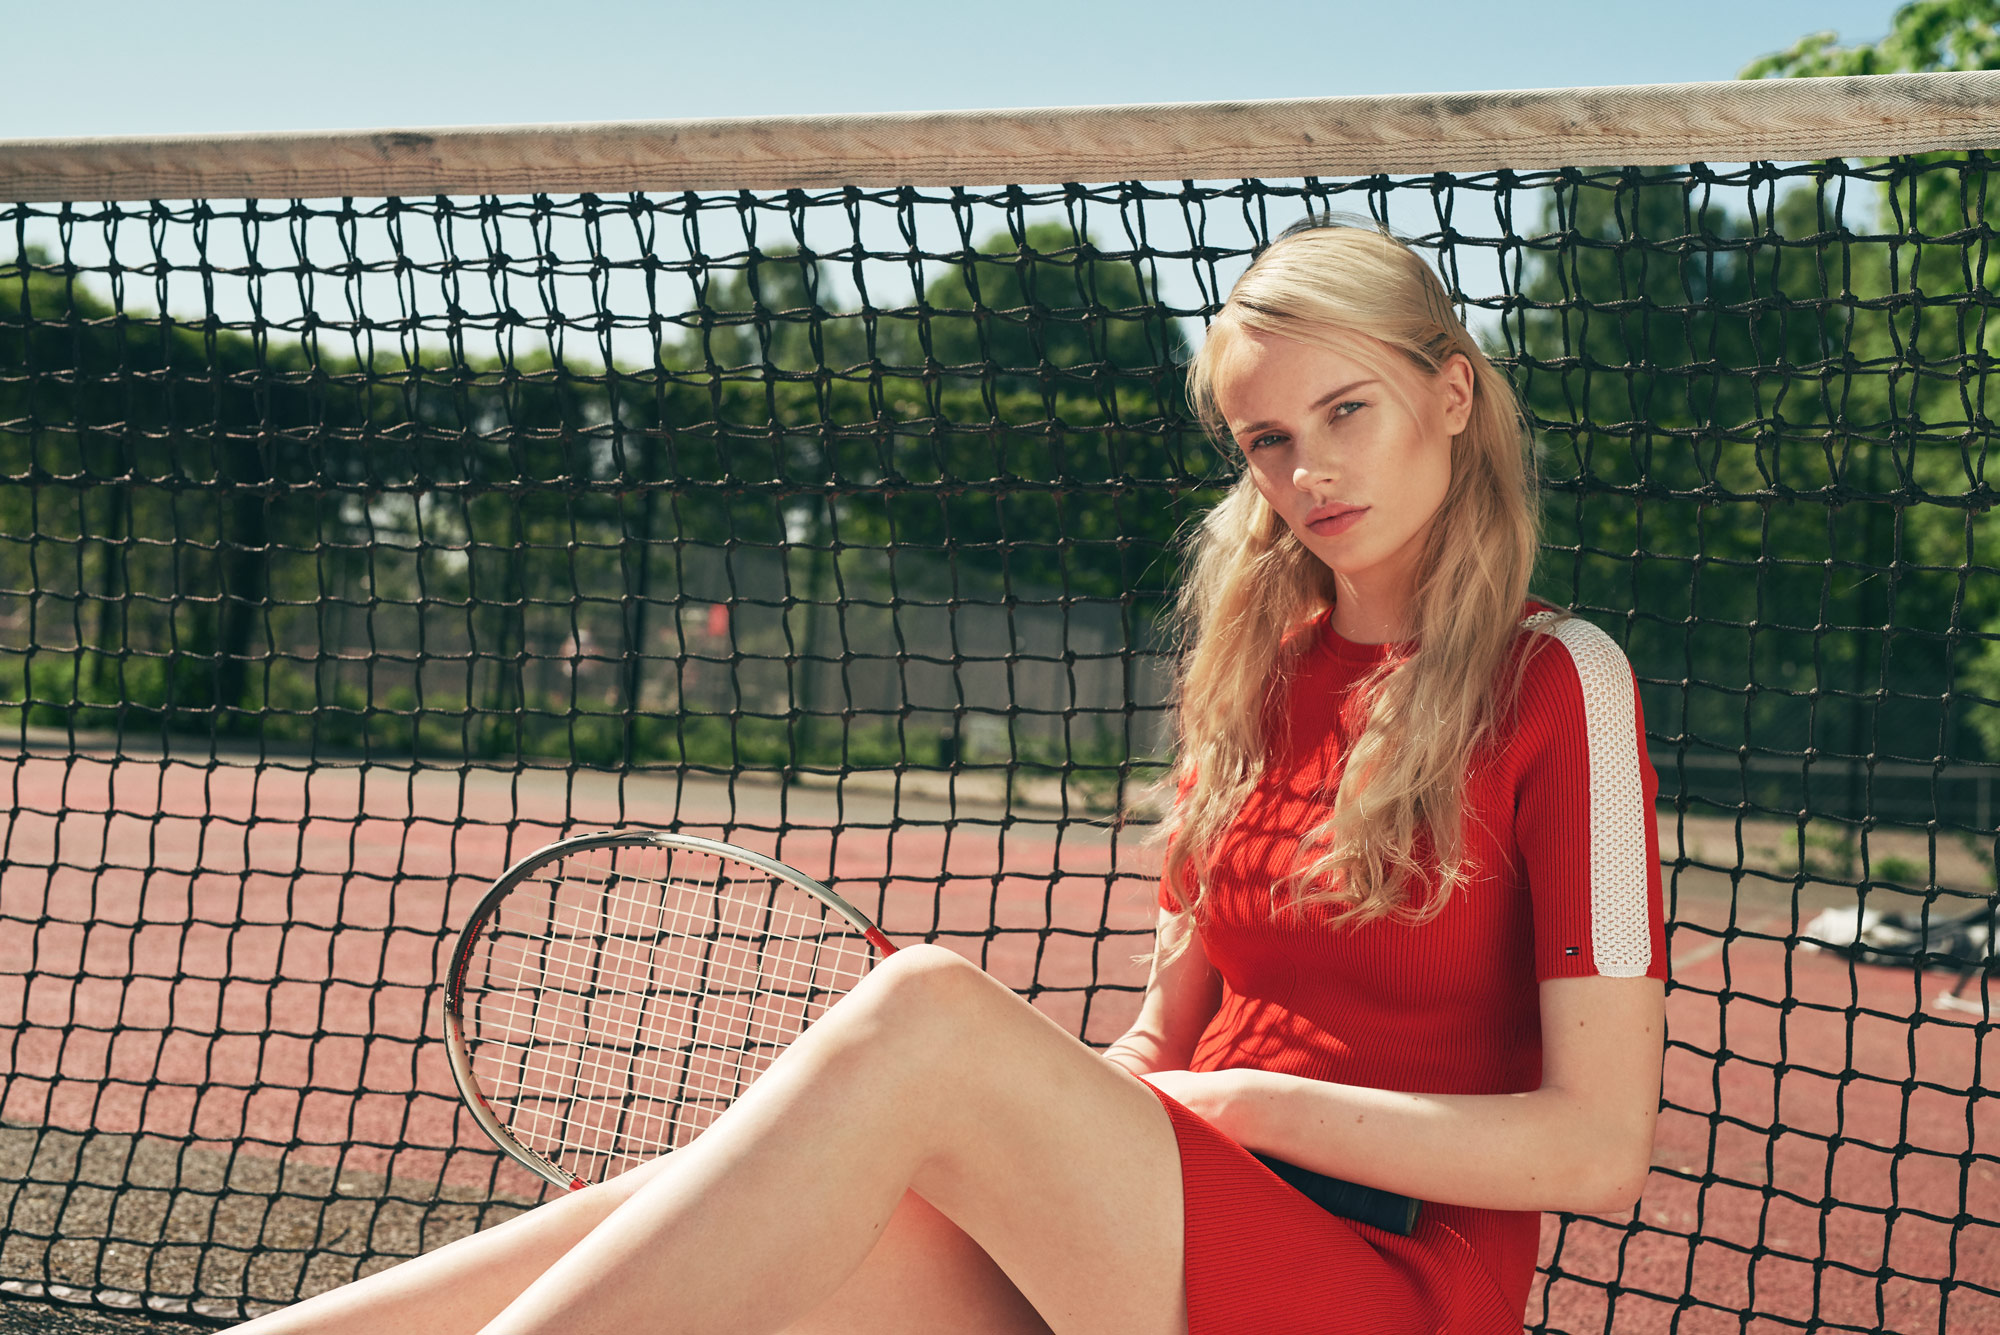 Tennis player leaning on the net. Editorial fashion series for Bogstadveien Magazine in Oslo by Håvard Schei.